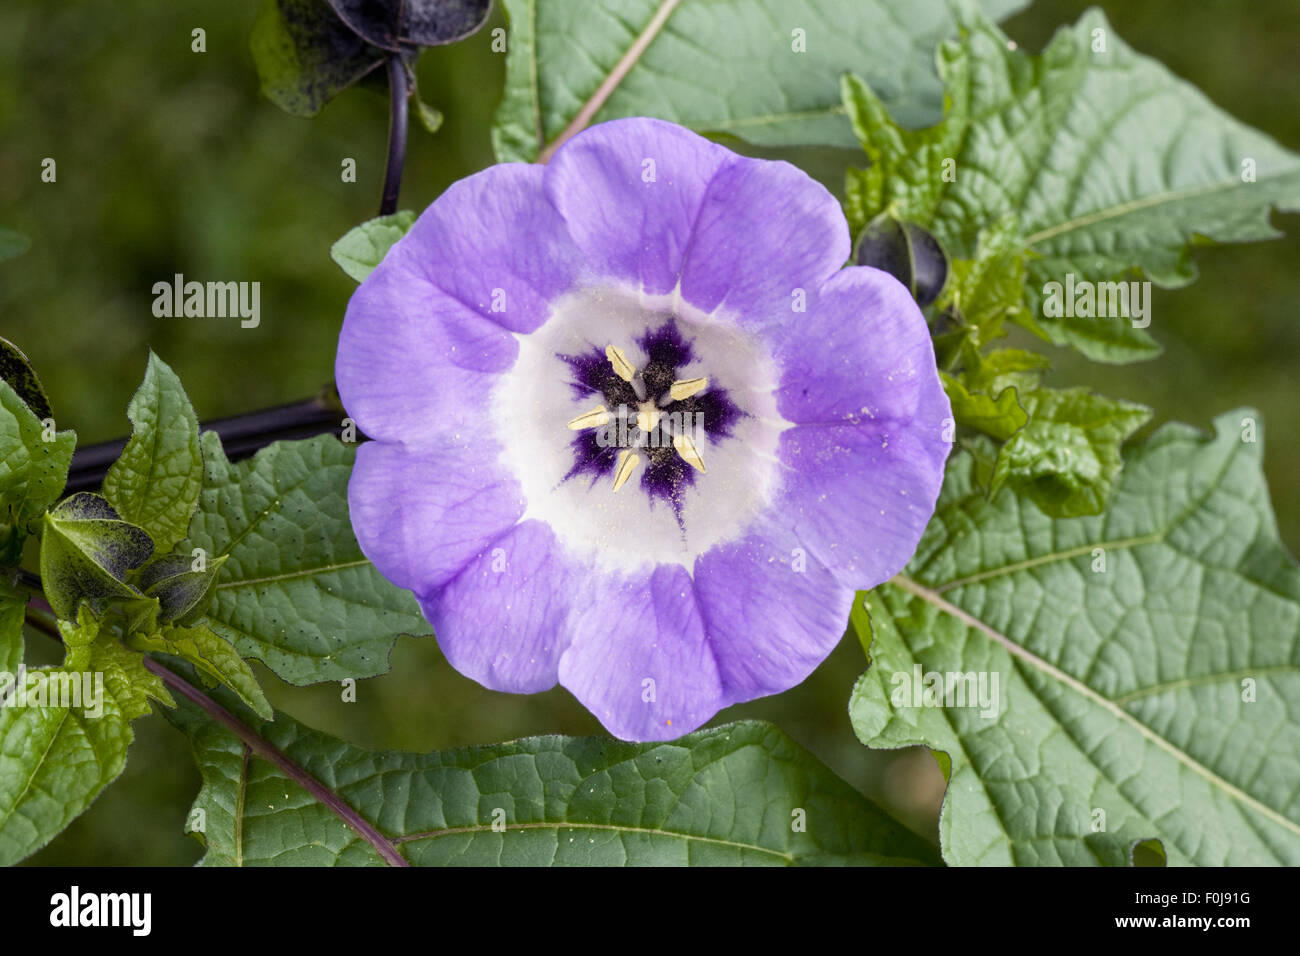 Nicandra physalodes. Shoo-fly plant flower. Stock Photo